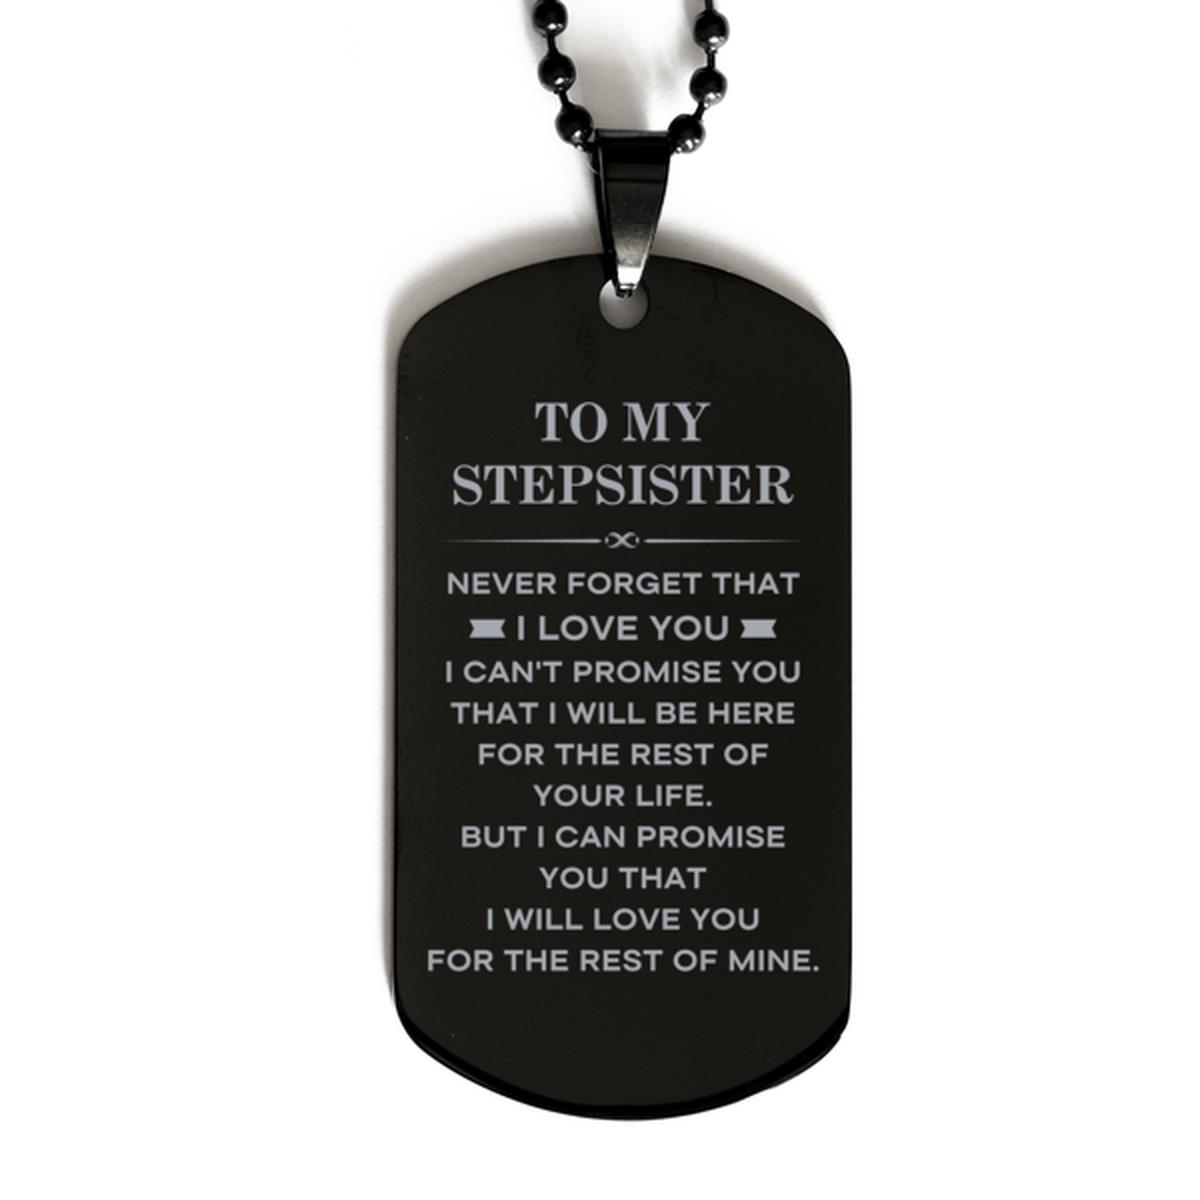 To My Stepsister Gifts, I will love you for the rest of mine, Love Stepsister Dog Tag Necklace, Birthday Christmas Unique Black Dog Tag For Stepsister